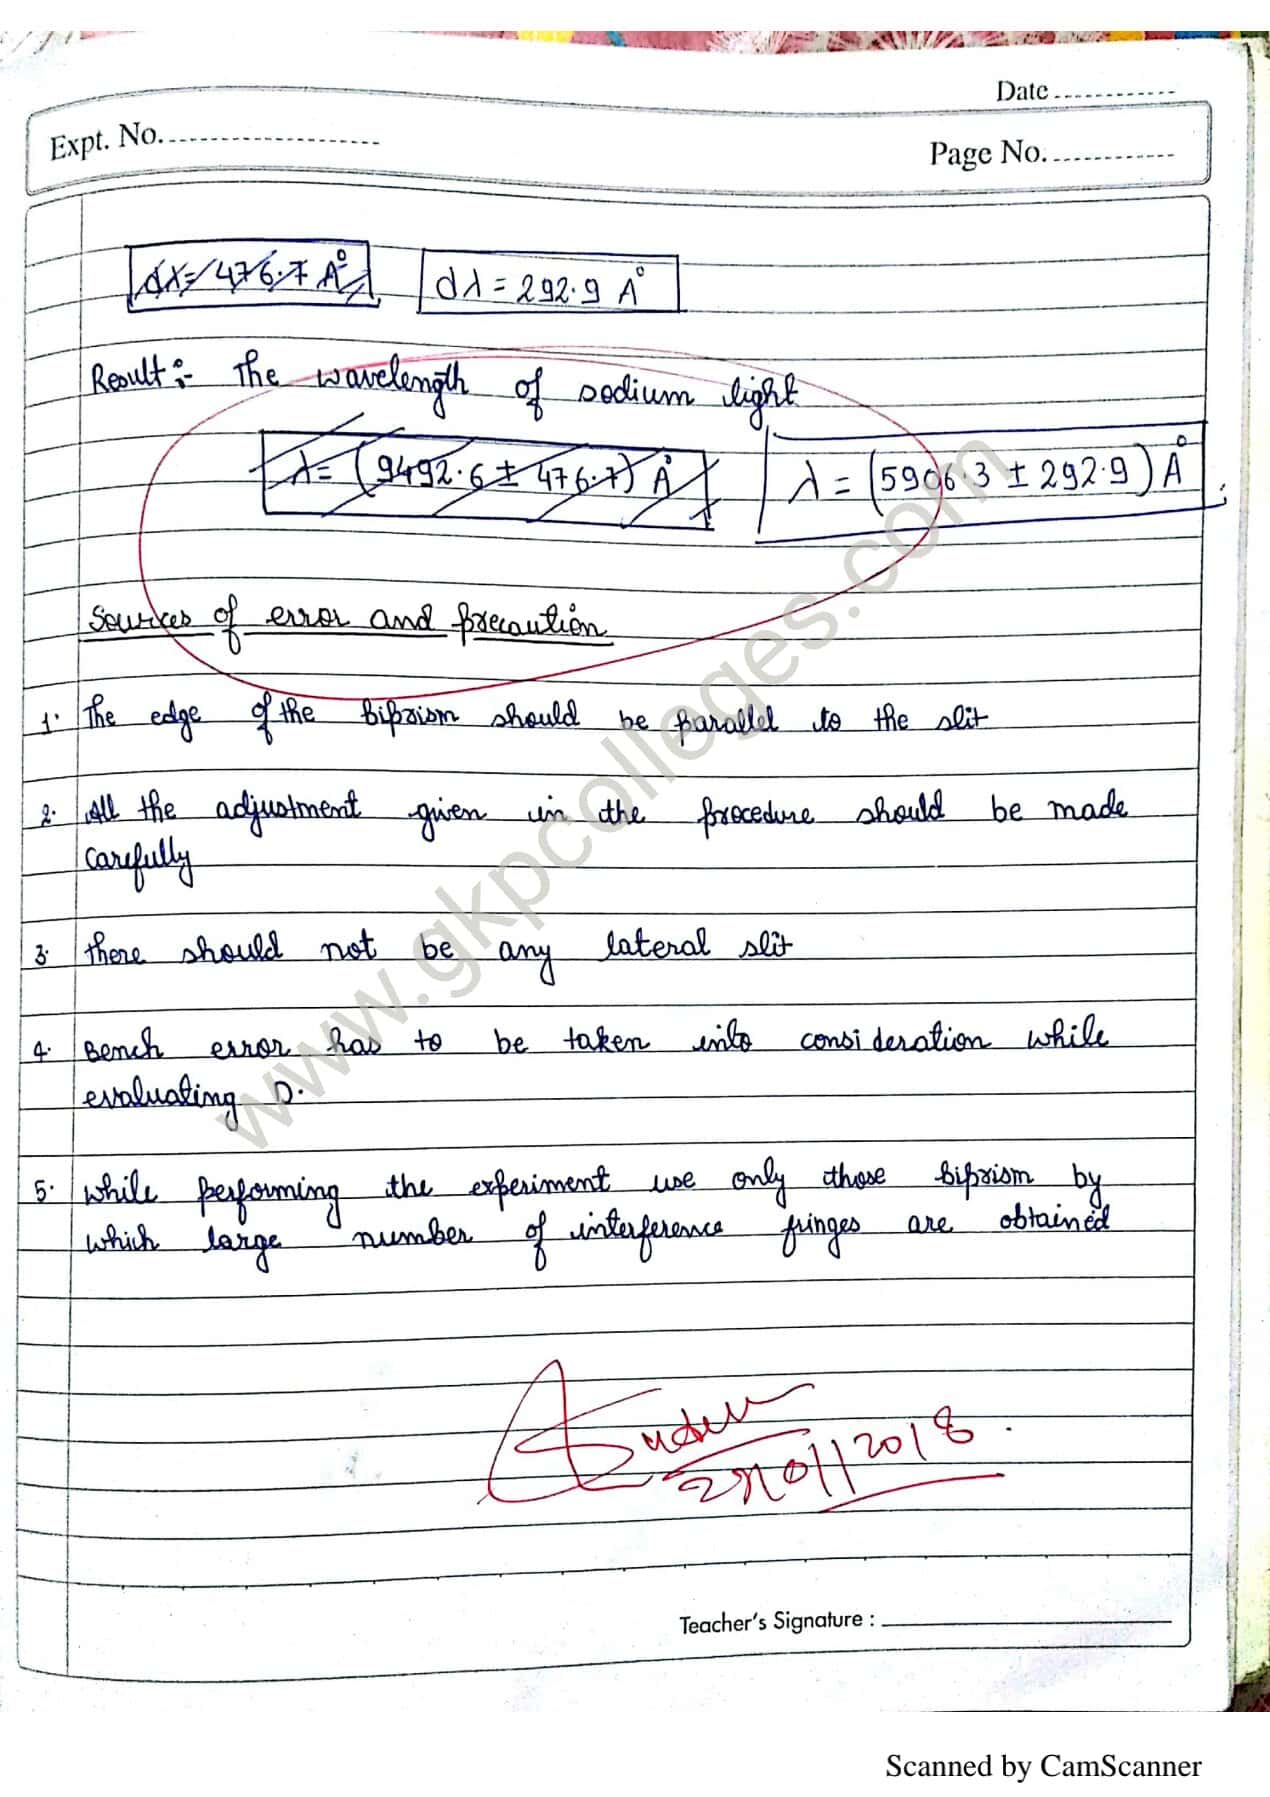 Physics(Optics) Practical Notes of B.Sc. 2nd Year Student for DDU and St. Andrew's PG College, Gorakhpur